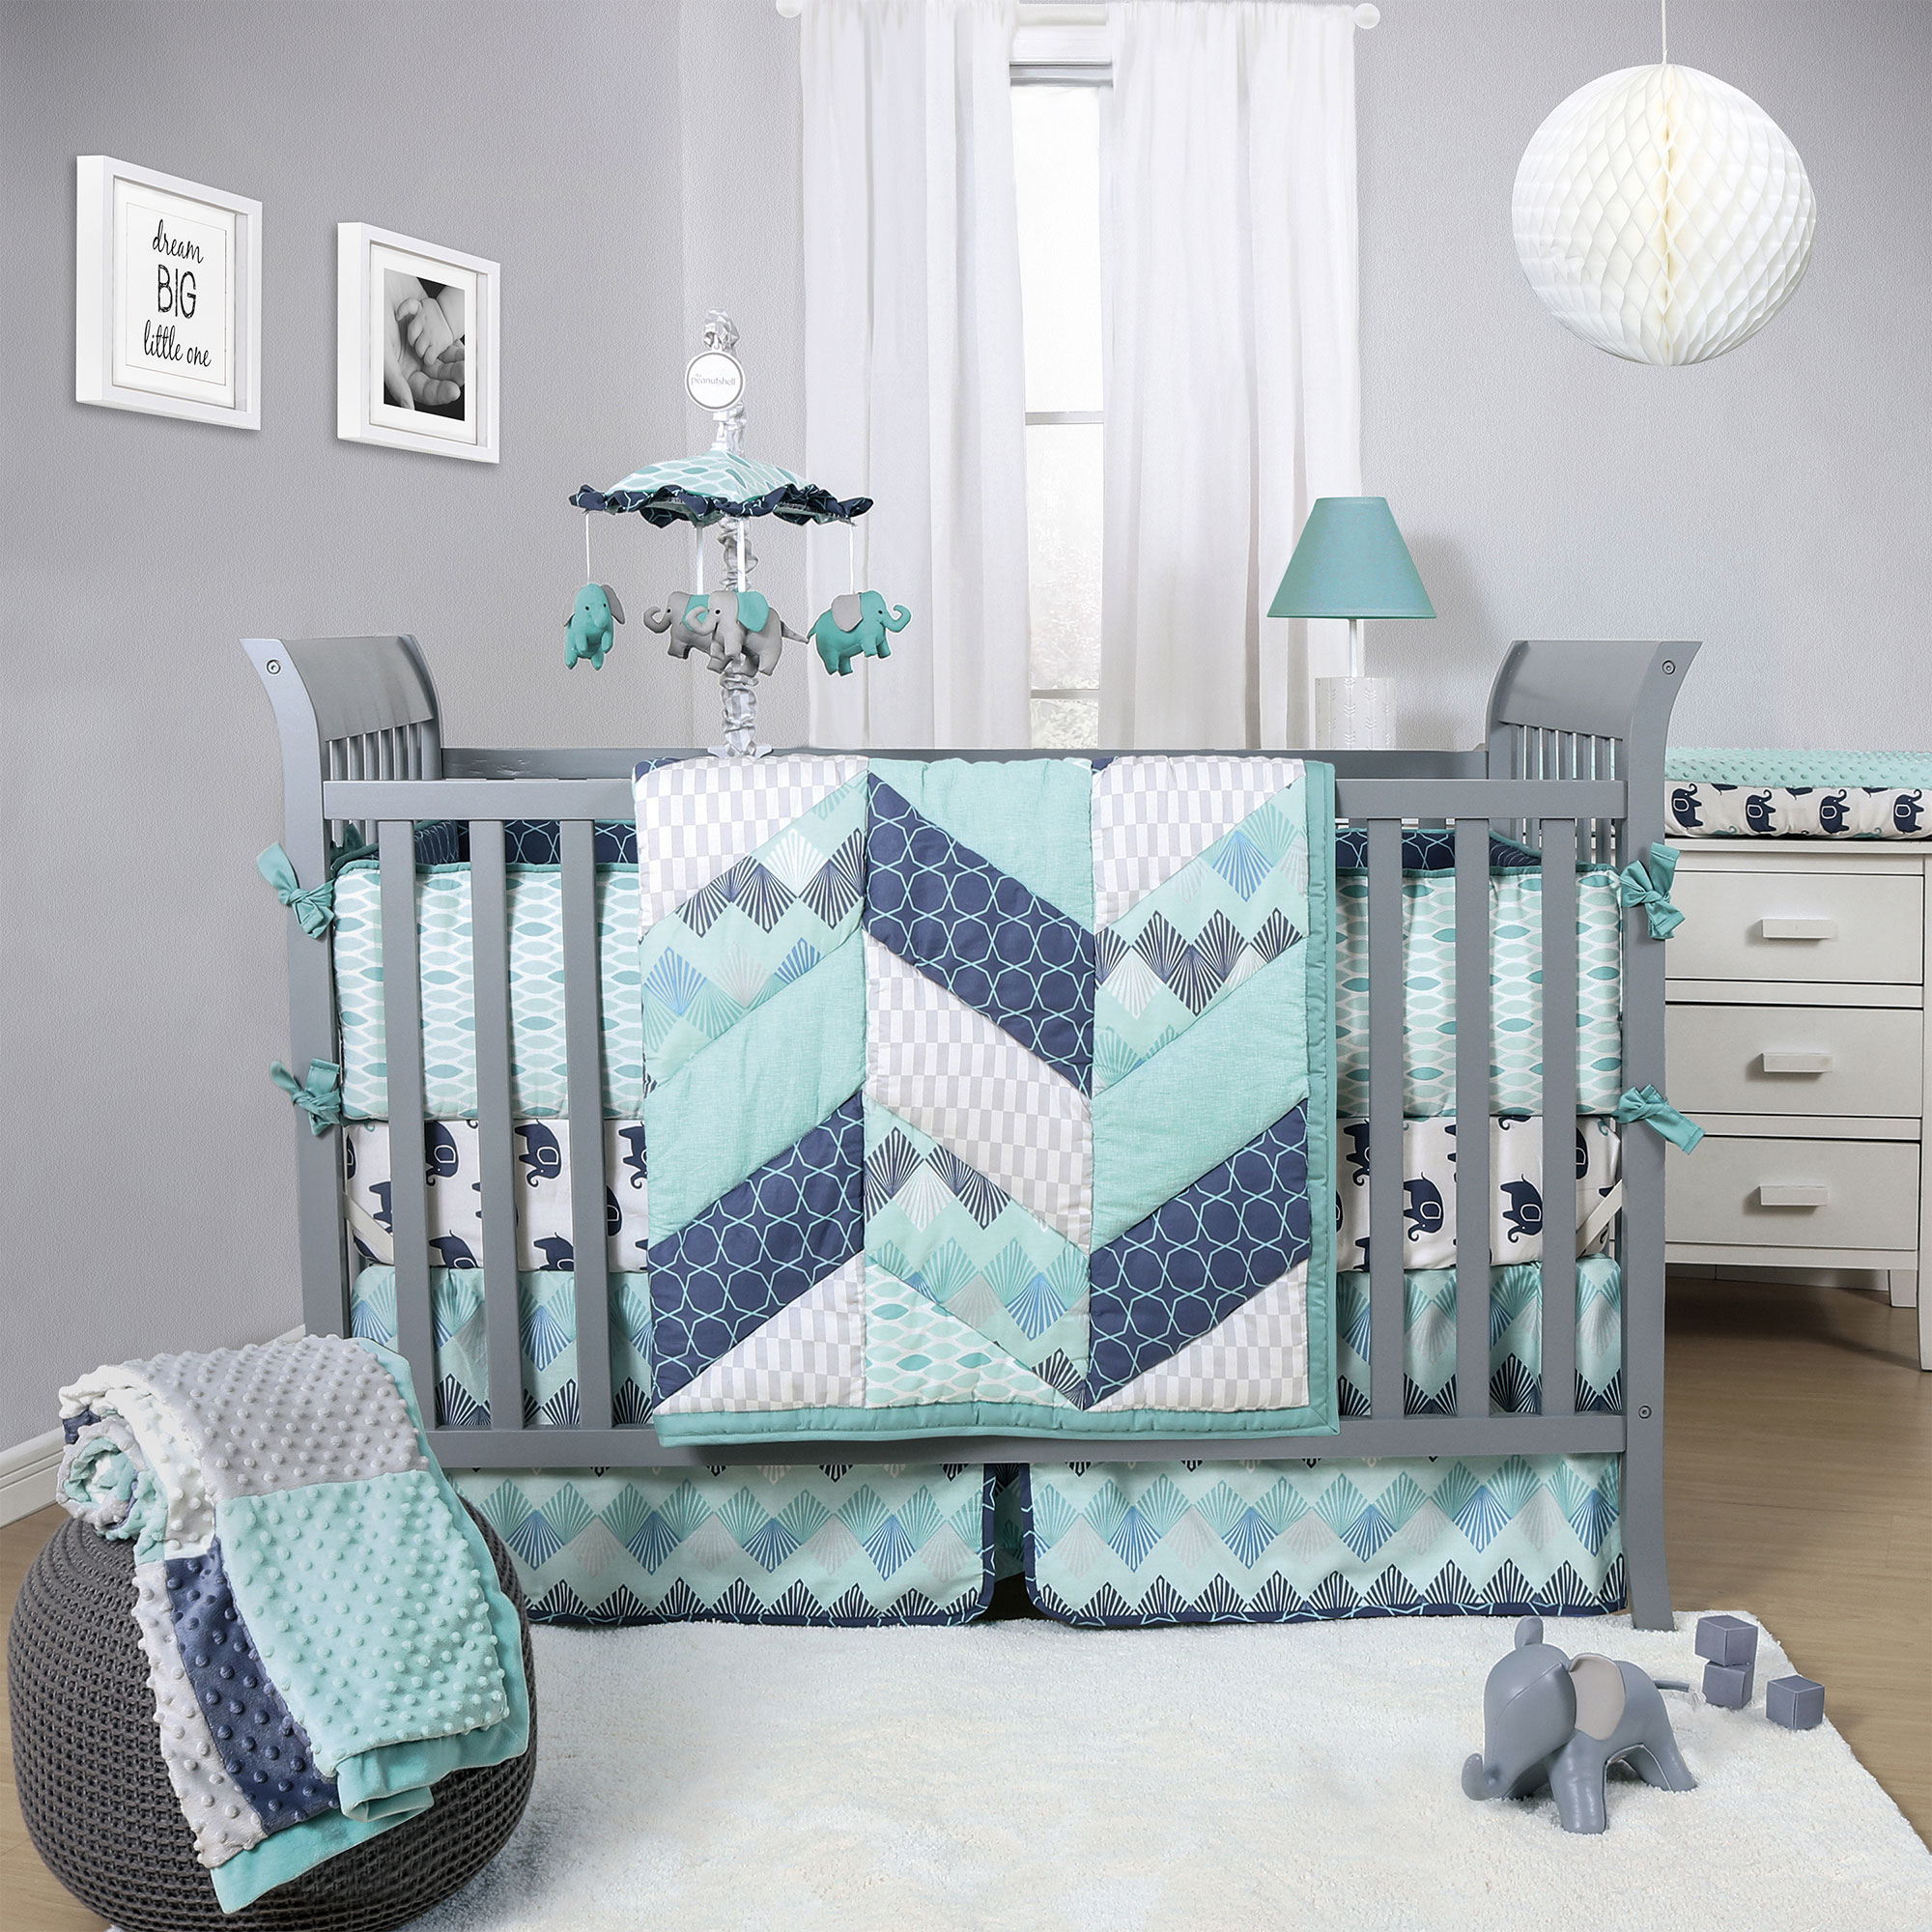 Bedding Sets for Children's Rooms The Peanut Shell Mosaic Bedding Set - Geometric Prints in Teal, NTZBITP